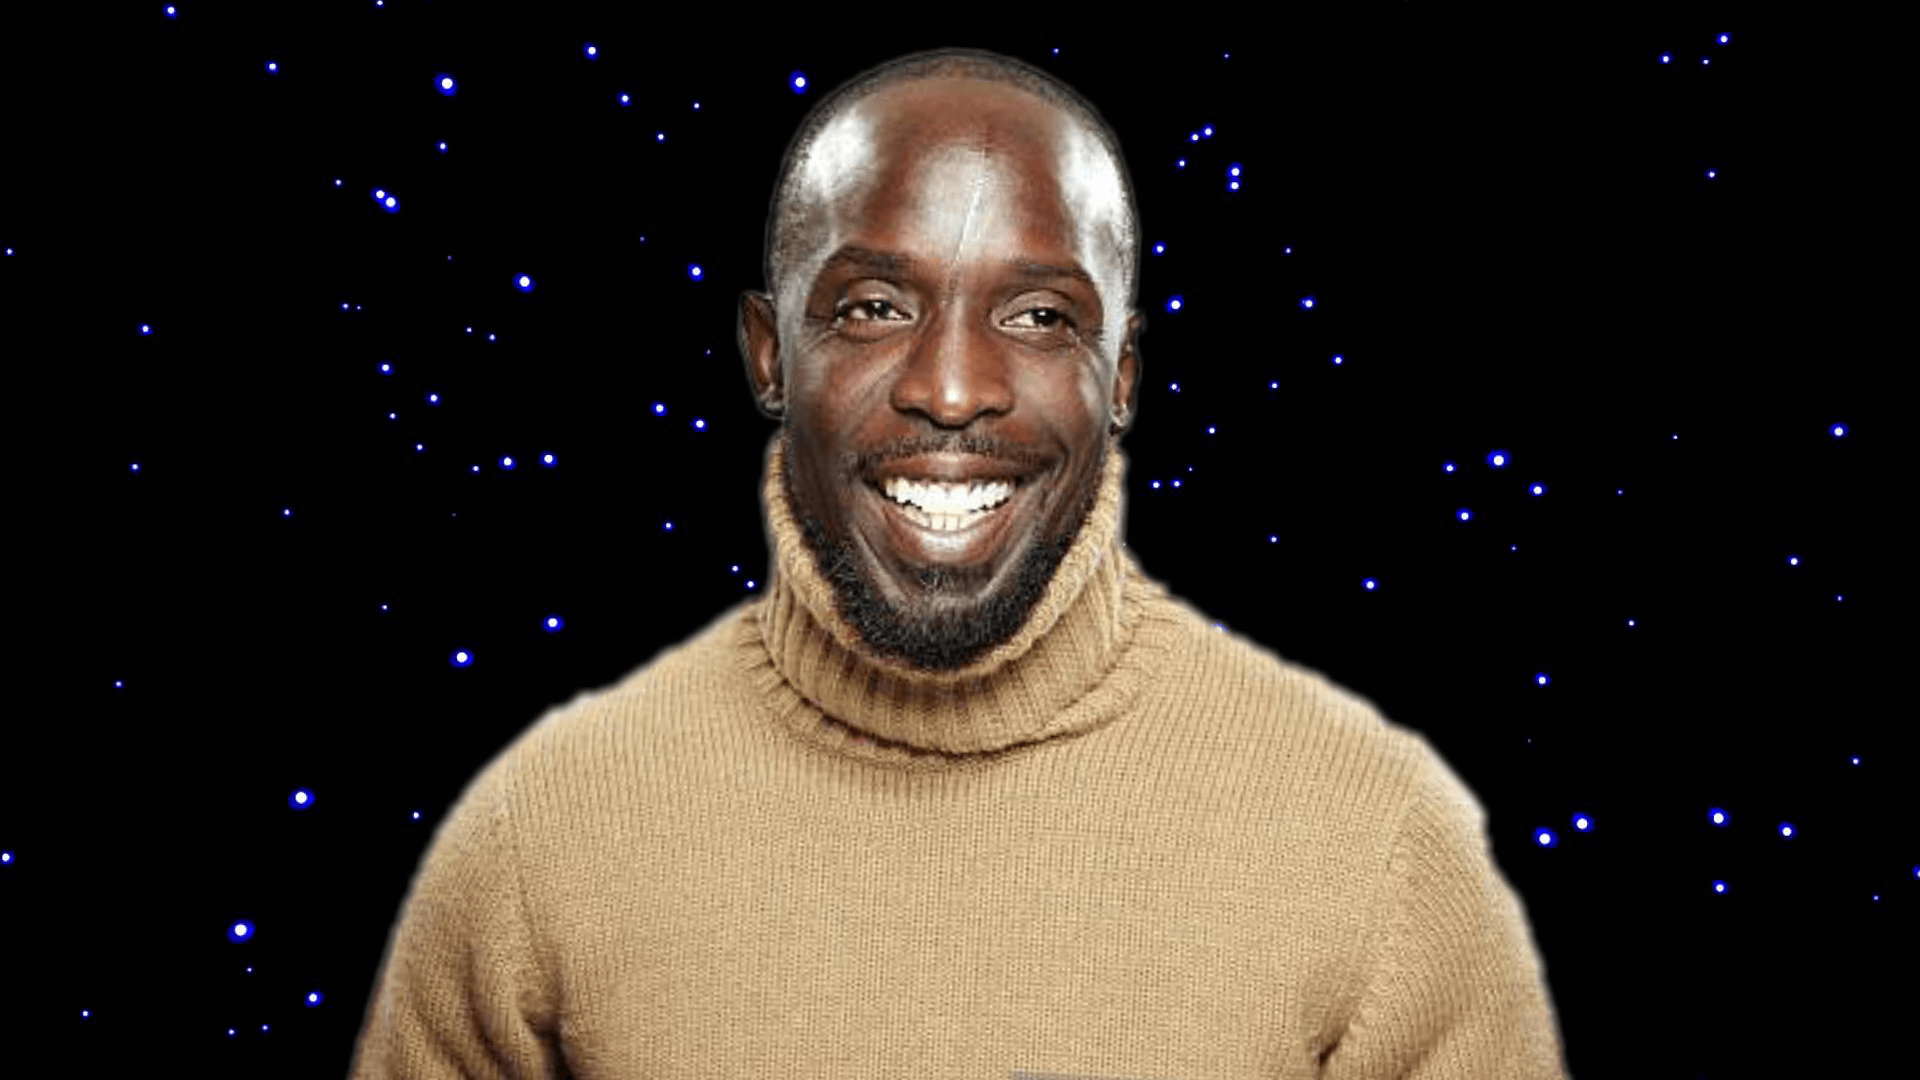 Michael K. Williams Role In The ‘HAN SOLO’ Movie Has Been Cut!